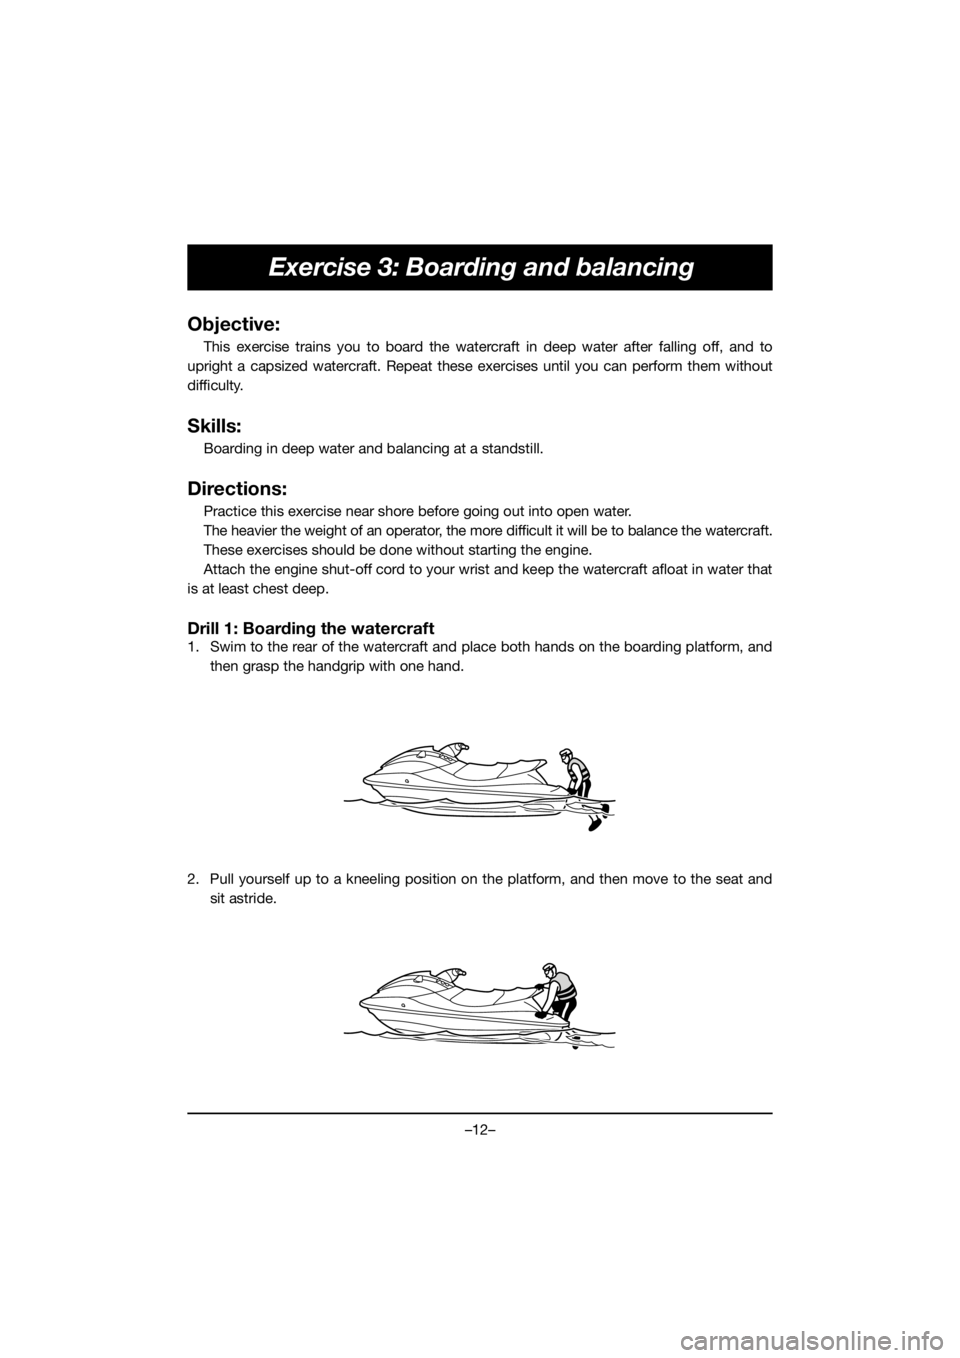 YAMAHA VX DELUXE 2021  Manuale de Empleo (in Spanish) –12–
Exercise 3: Boarding and balancing
Objective:
This exercise trains you to board the watercraft in deep water after falling off, and to
upright a capsized watercraft. Repeat these exercises un